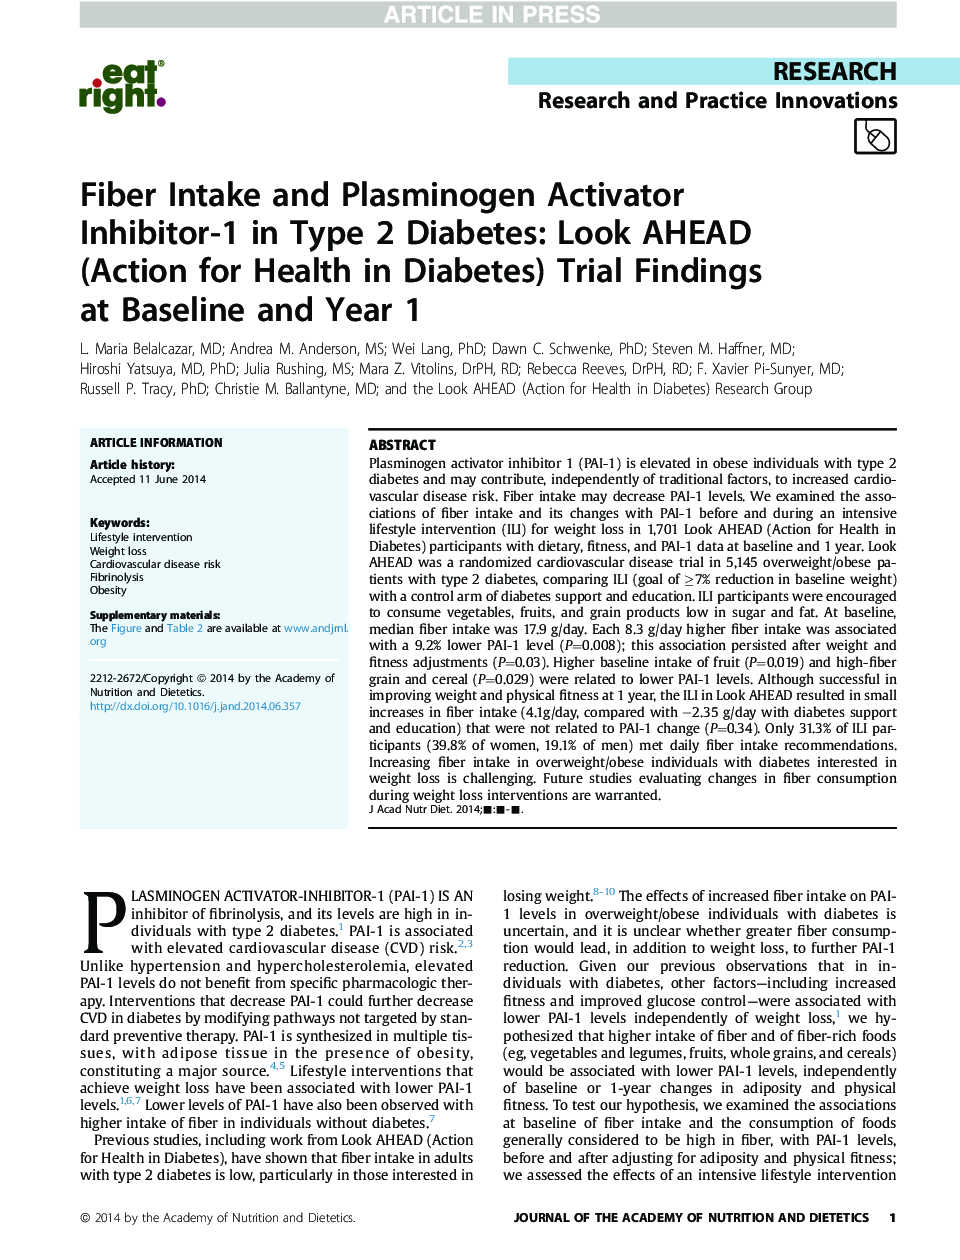 Fiber Intake and Plasminogen Activator Inhibitor-1 in Type 2 Diabetes: Look AHEAD (Action for Health in Diabetes) Trial Findings atÂ Baseline and Year 1